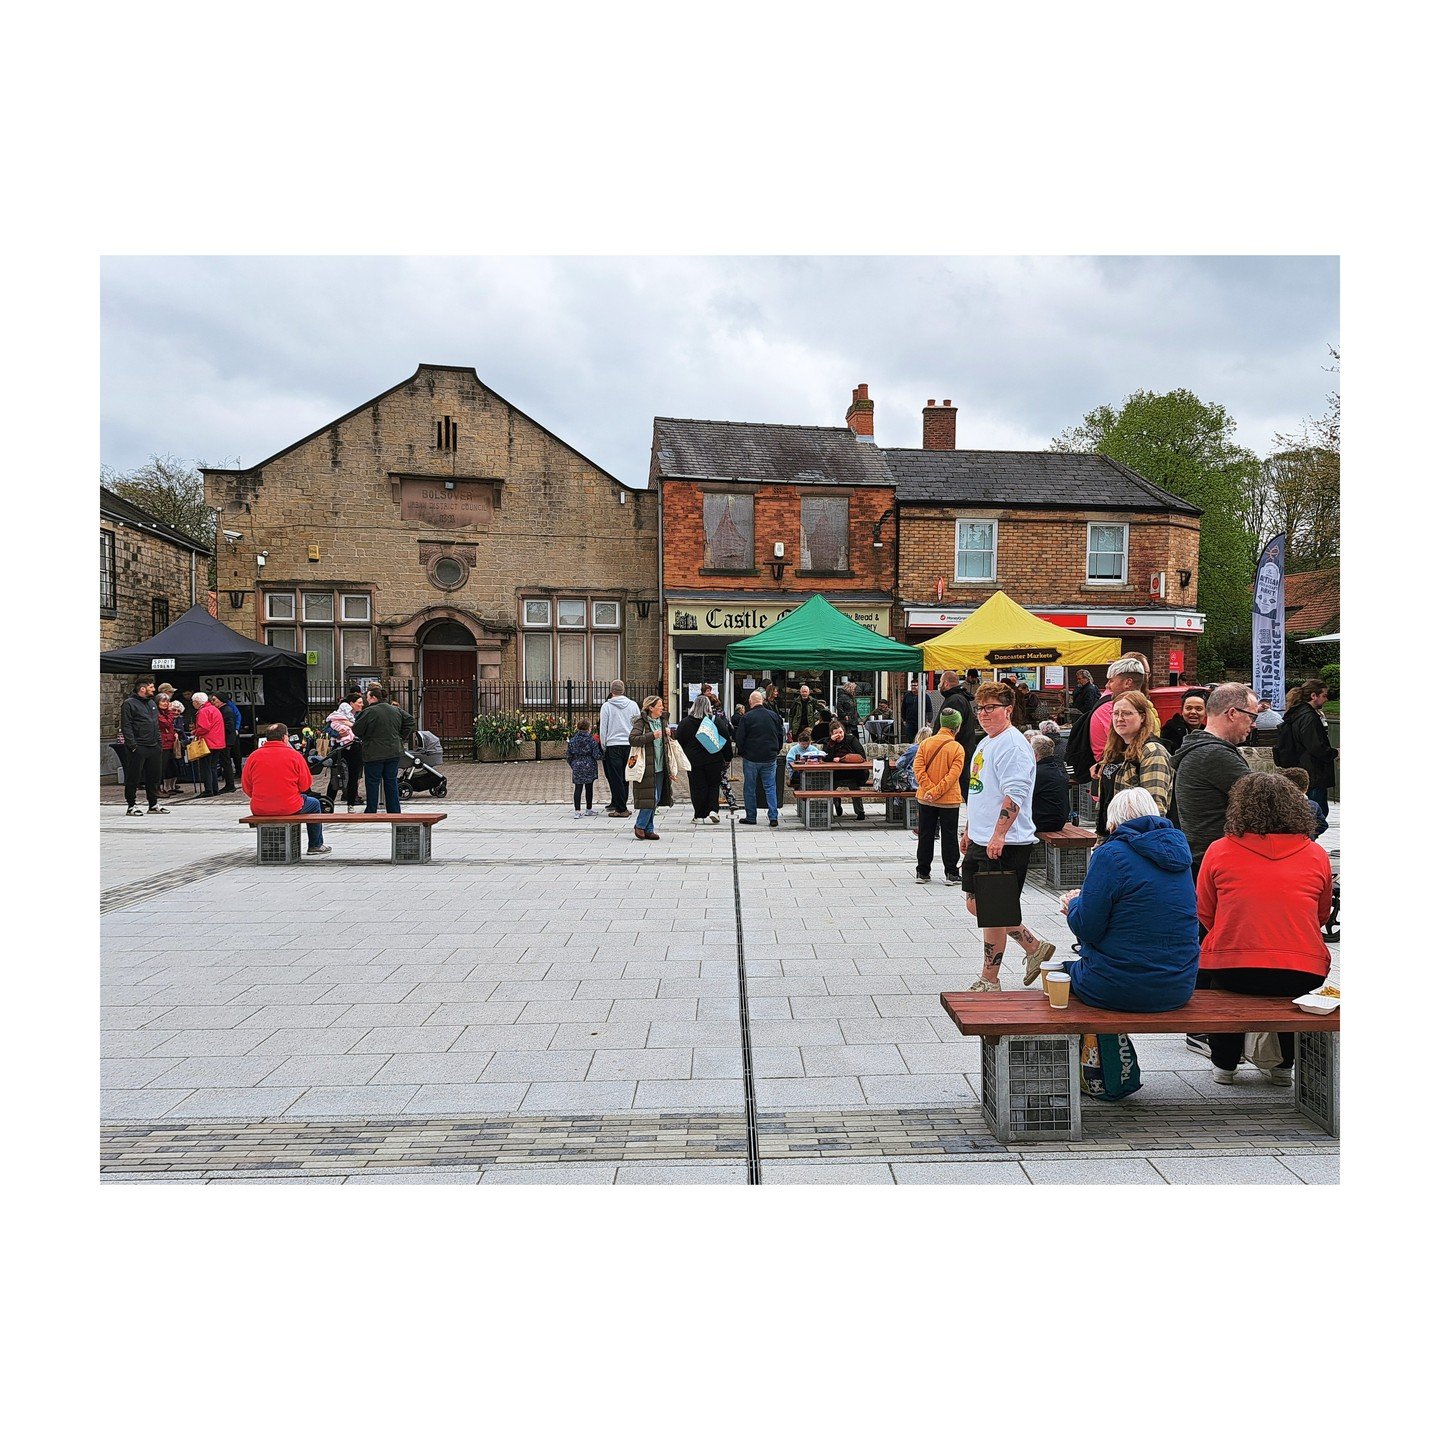 Lovely to pop into Bolsover this morning and visit the Artisan Food and Craft Market and see the newly complete Town Hall Square bustling with activity. Posh burgers, loaded fries and tasty brownies on offer just in the square! Great to see the space